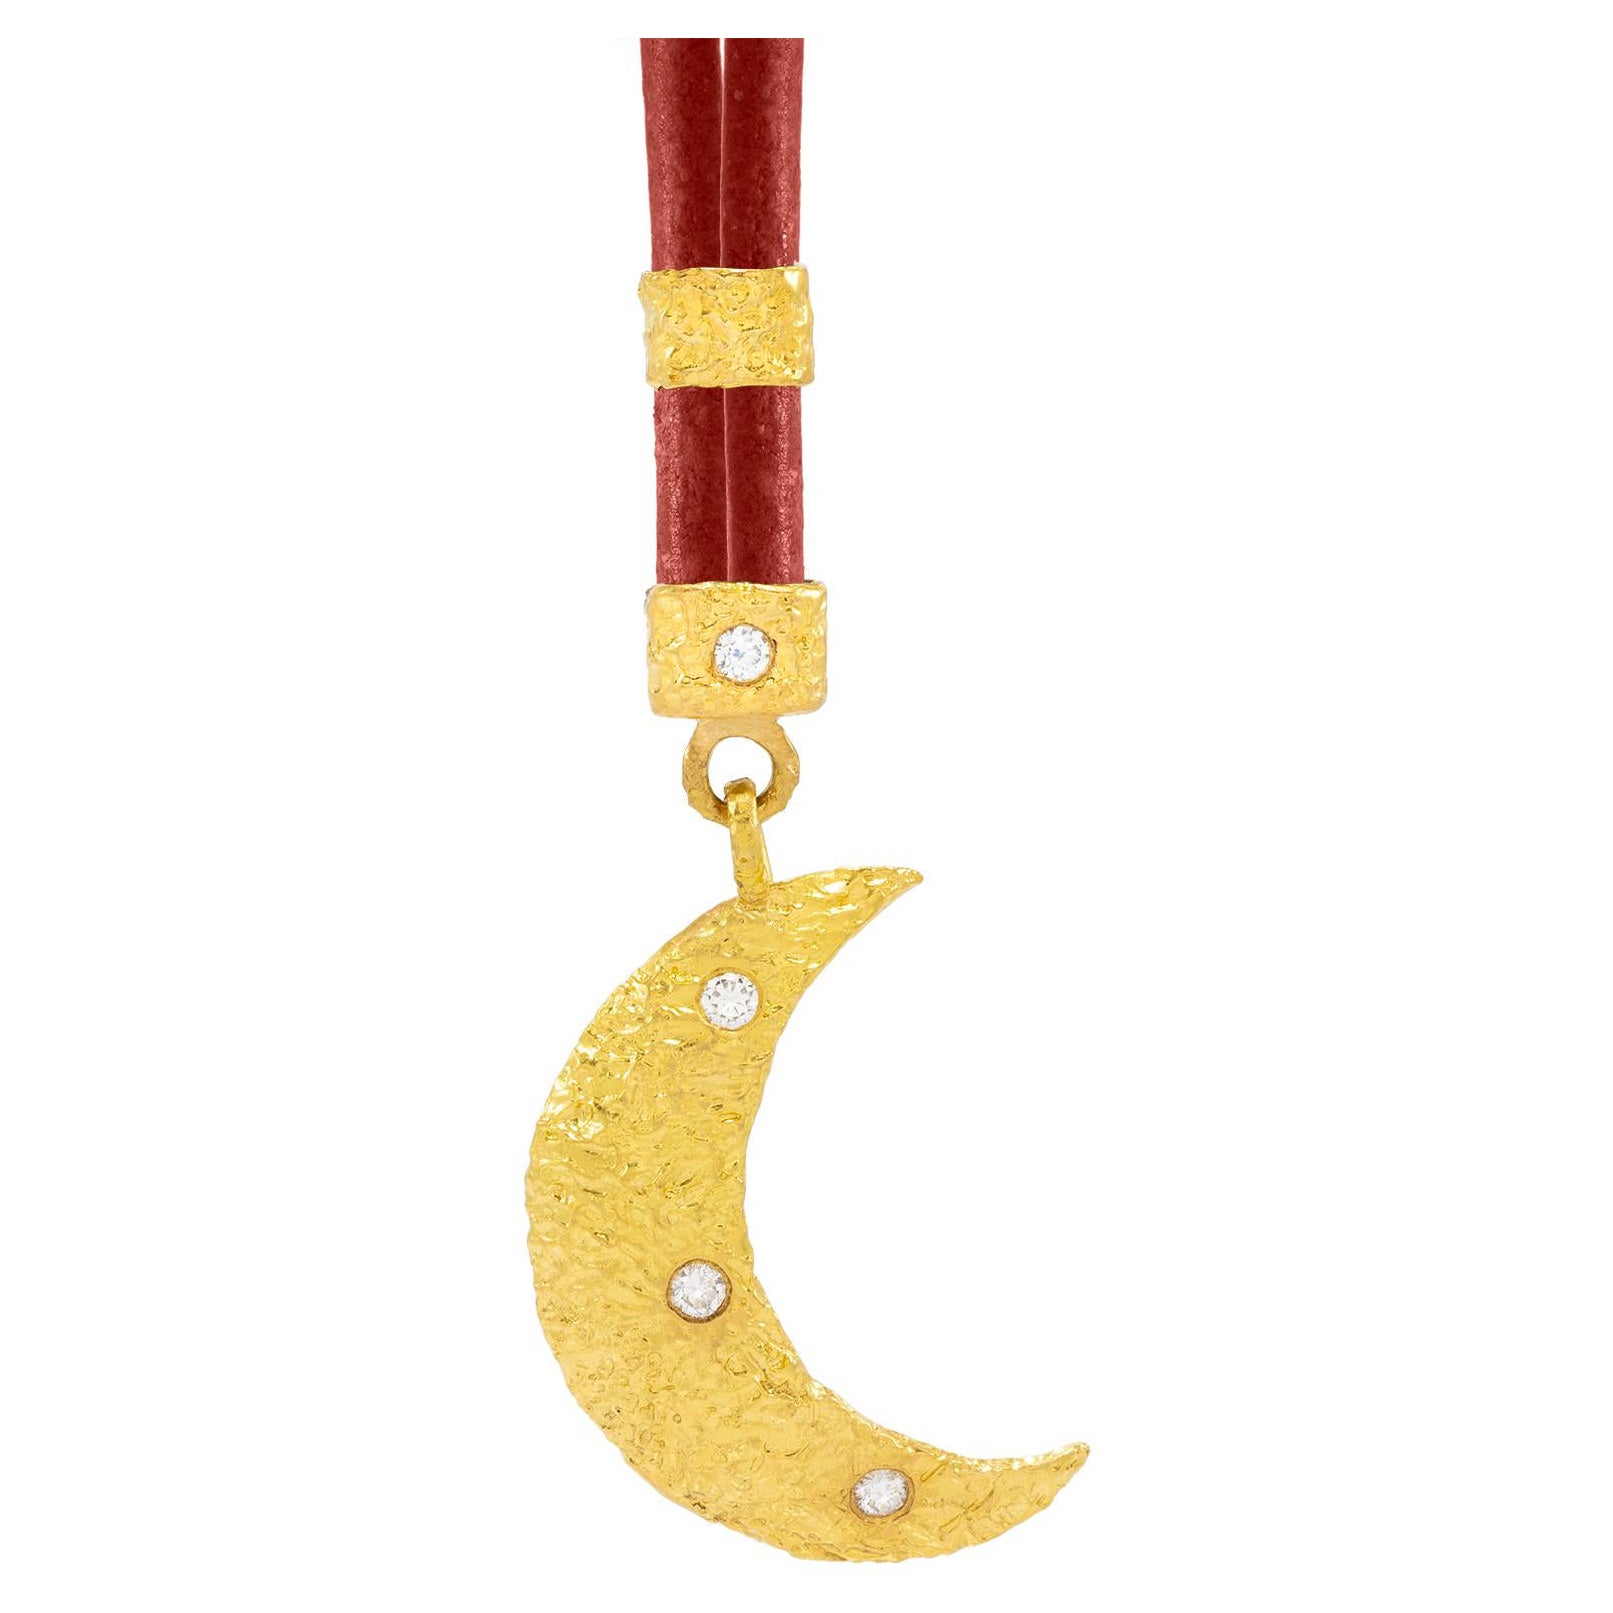 Allegra Crescent Moon Pendant in 22k Gold, by Tagili